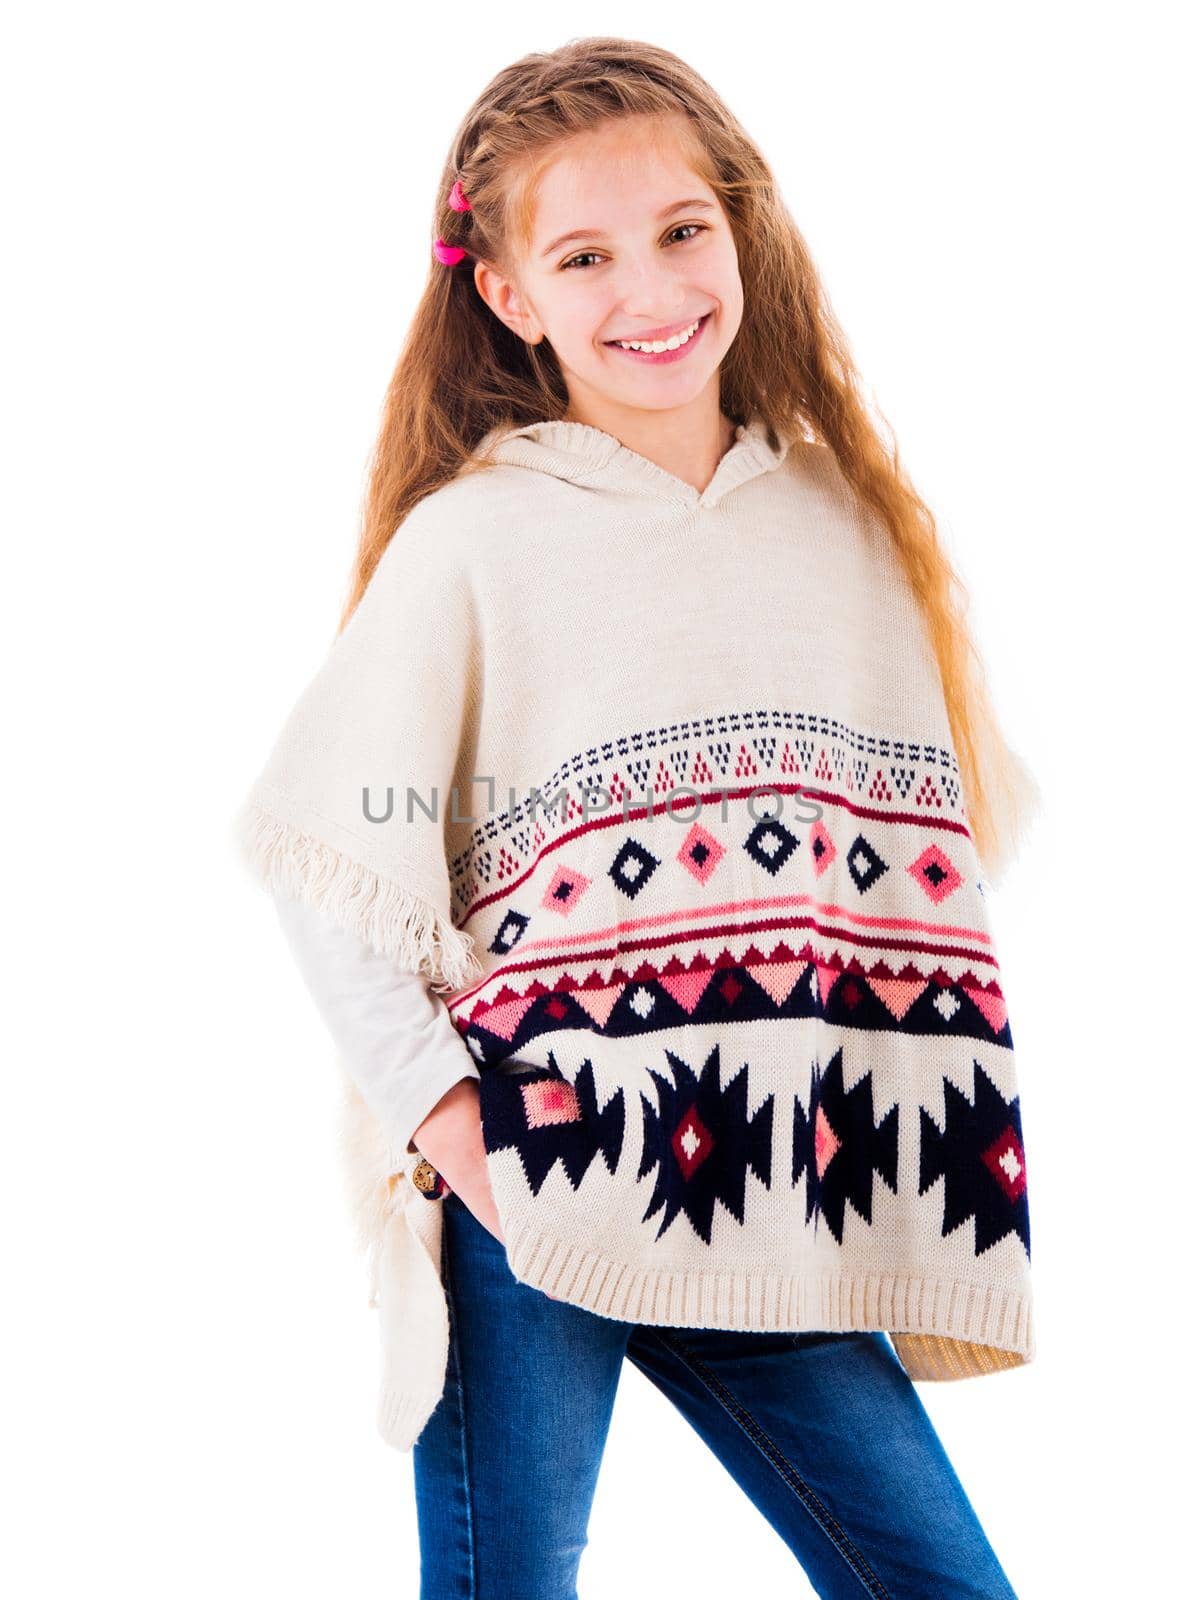 Smiling adorable little girl posing in warm beige poncho and jeans isolated on white background